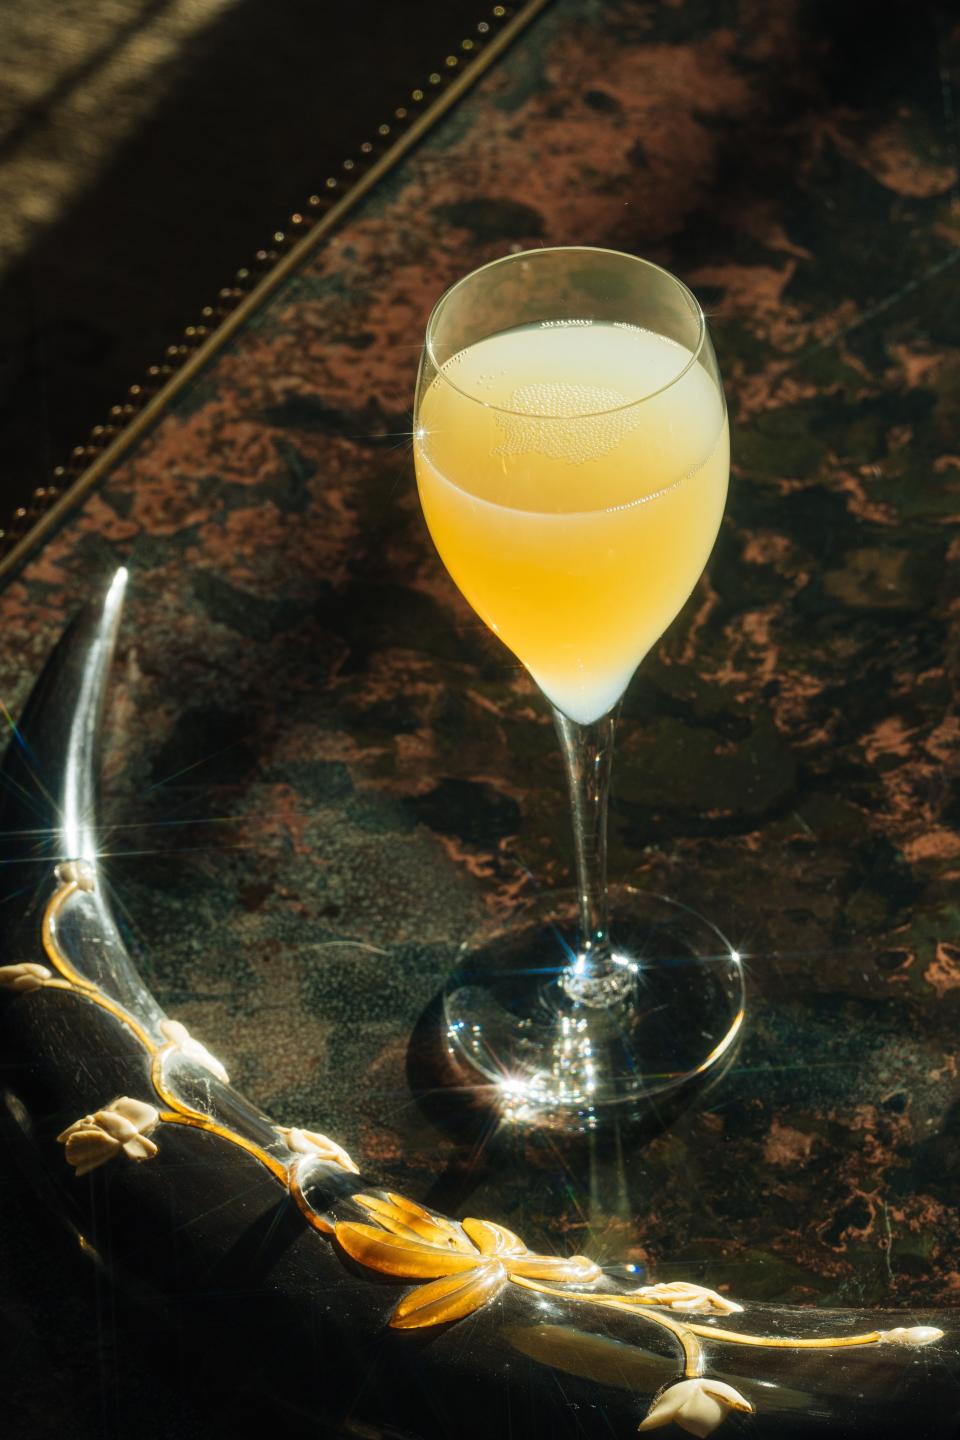 Author Ernest Hemingway's prescription for his "Death in the Afternoon" Absinthe-based creation: Drink three to five slowly. This and other effervescent cocktails offer a bubbly start to the new year.